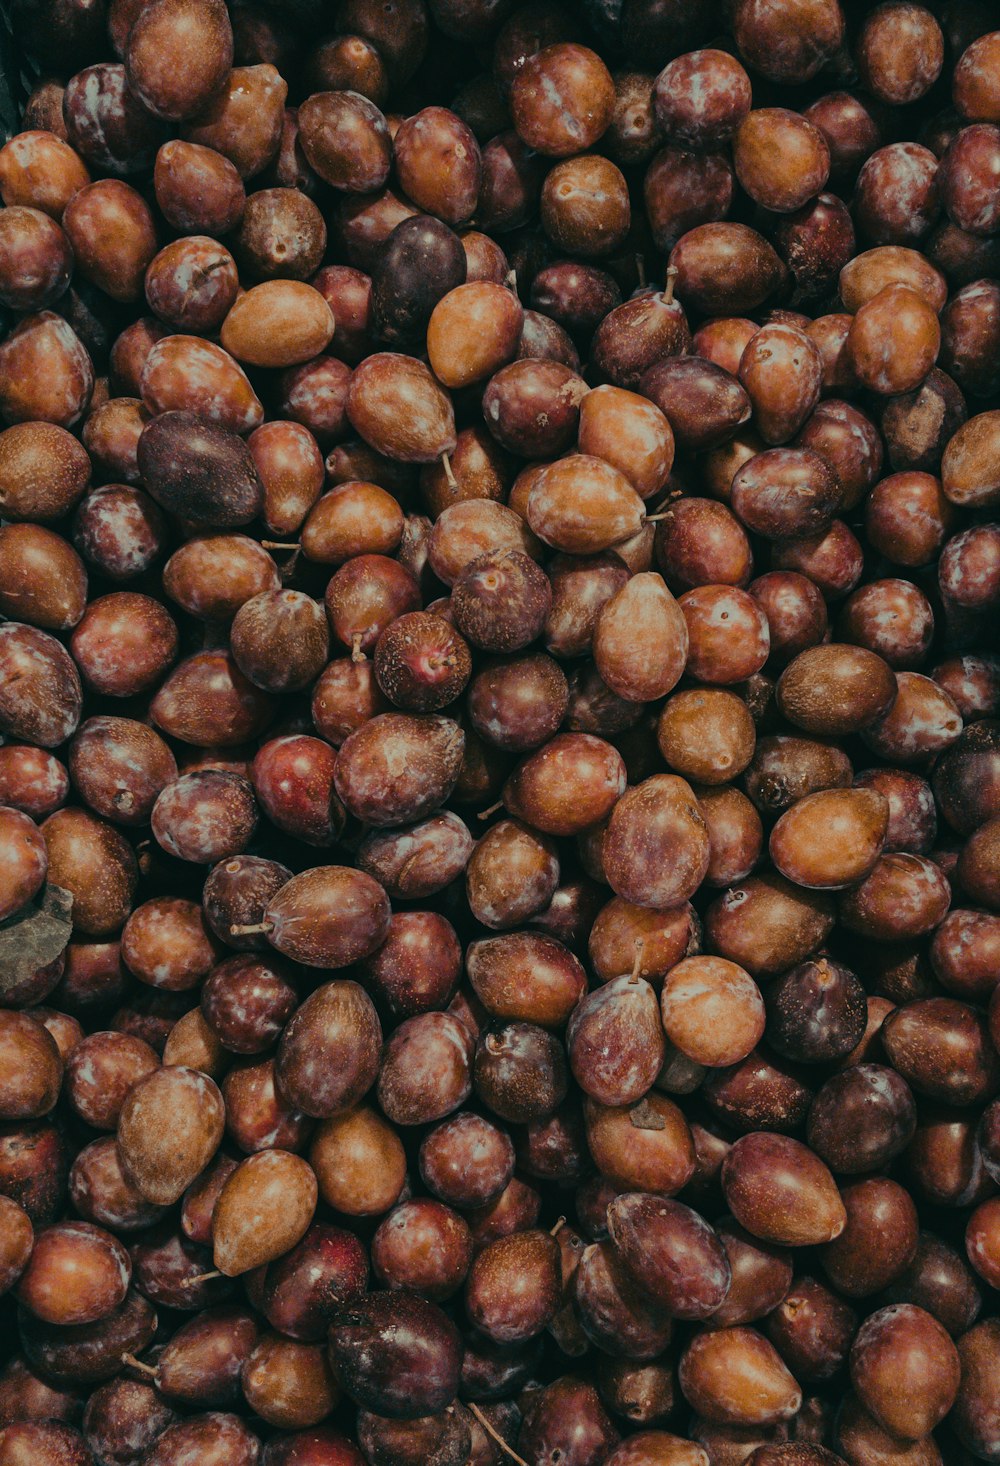 brown and black beans in close up photography